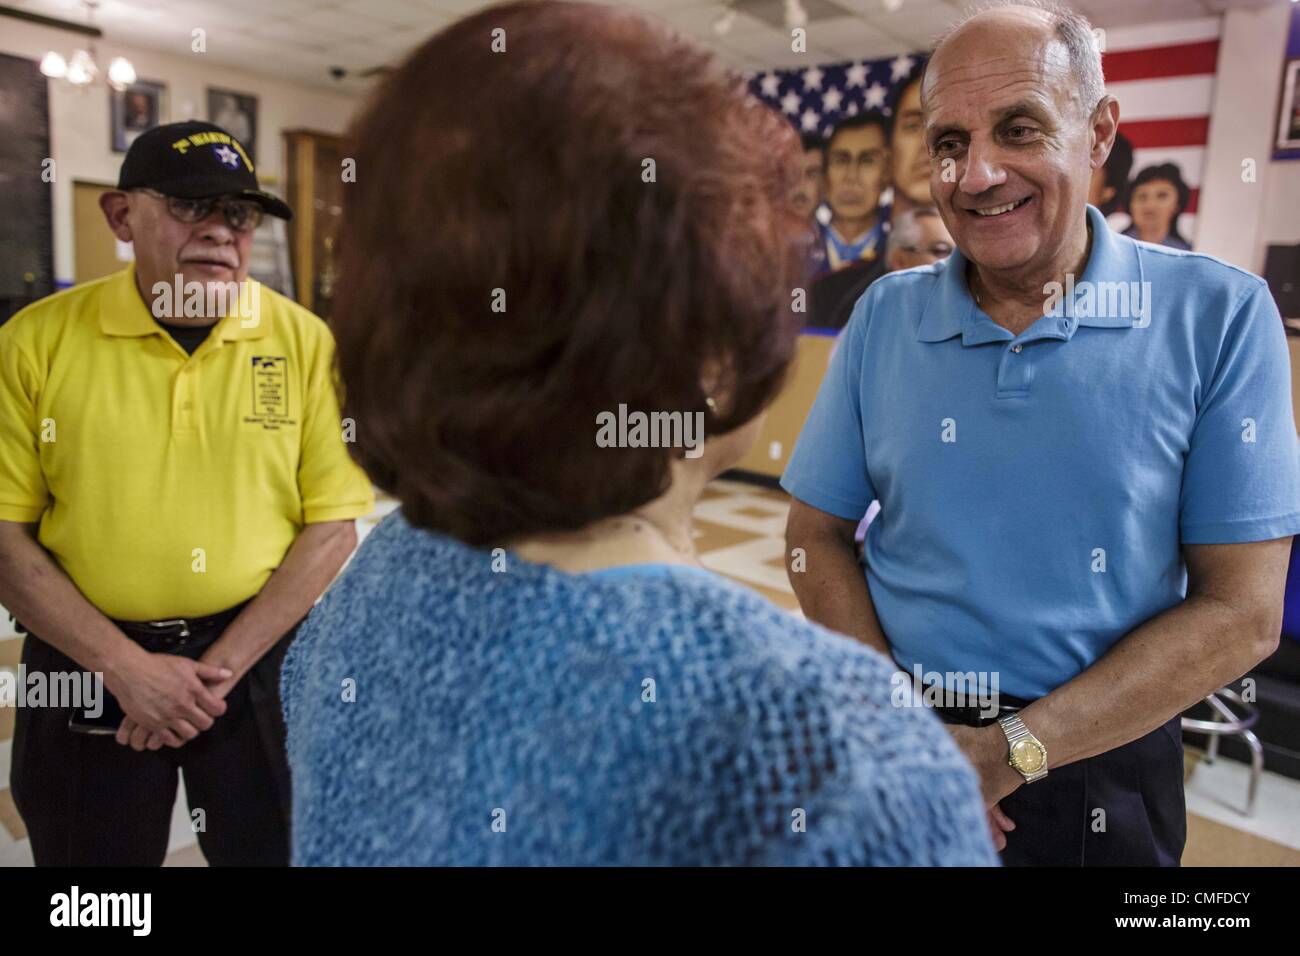 Aug. 2, 2012 - Phoenix, Arizona, U.S - Dr RICHARD CARMONA (blue shirt) talks to a veteran who was an Air Force nurse in Vietnam during a campaign stop at an American Legion Hall in Phoenix Thursday. Carmona, the former US Surgeon General under President George W. Bush, is running for the US Senate as a Democrat. Carmona's personal story is an important part of his campaign. He dropped out of high school to join the US Army. He applied for Special Forces and was turned down because he didn't have a high school diploma, he got his GED, reapplied and was accepted into Special Forces. He served in Stock Photo